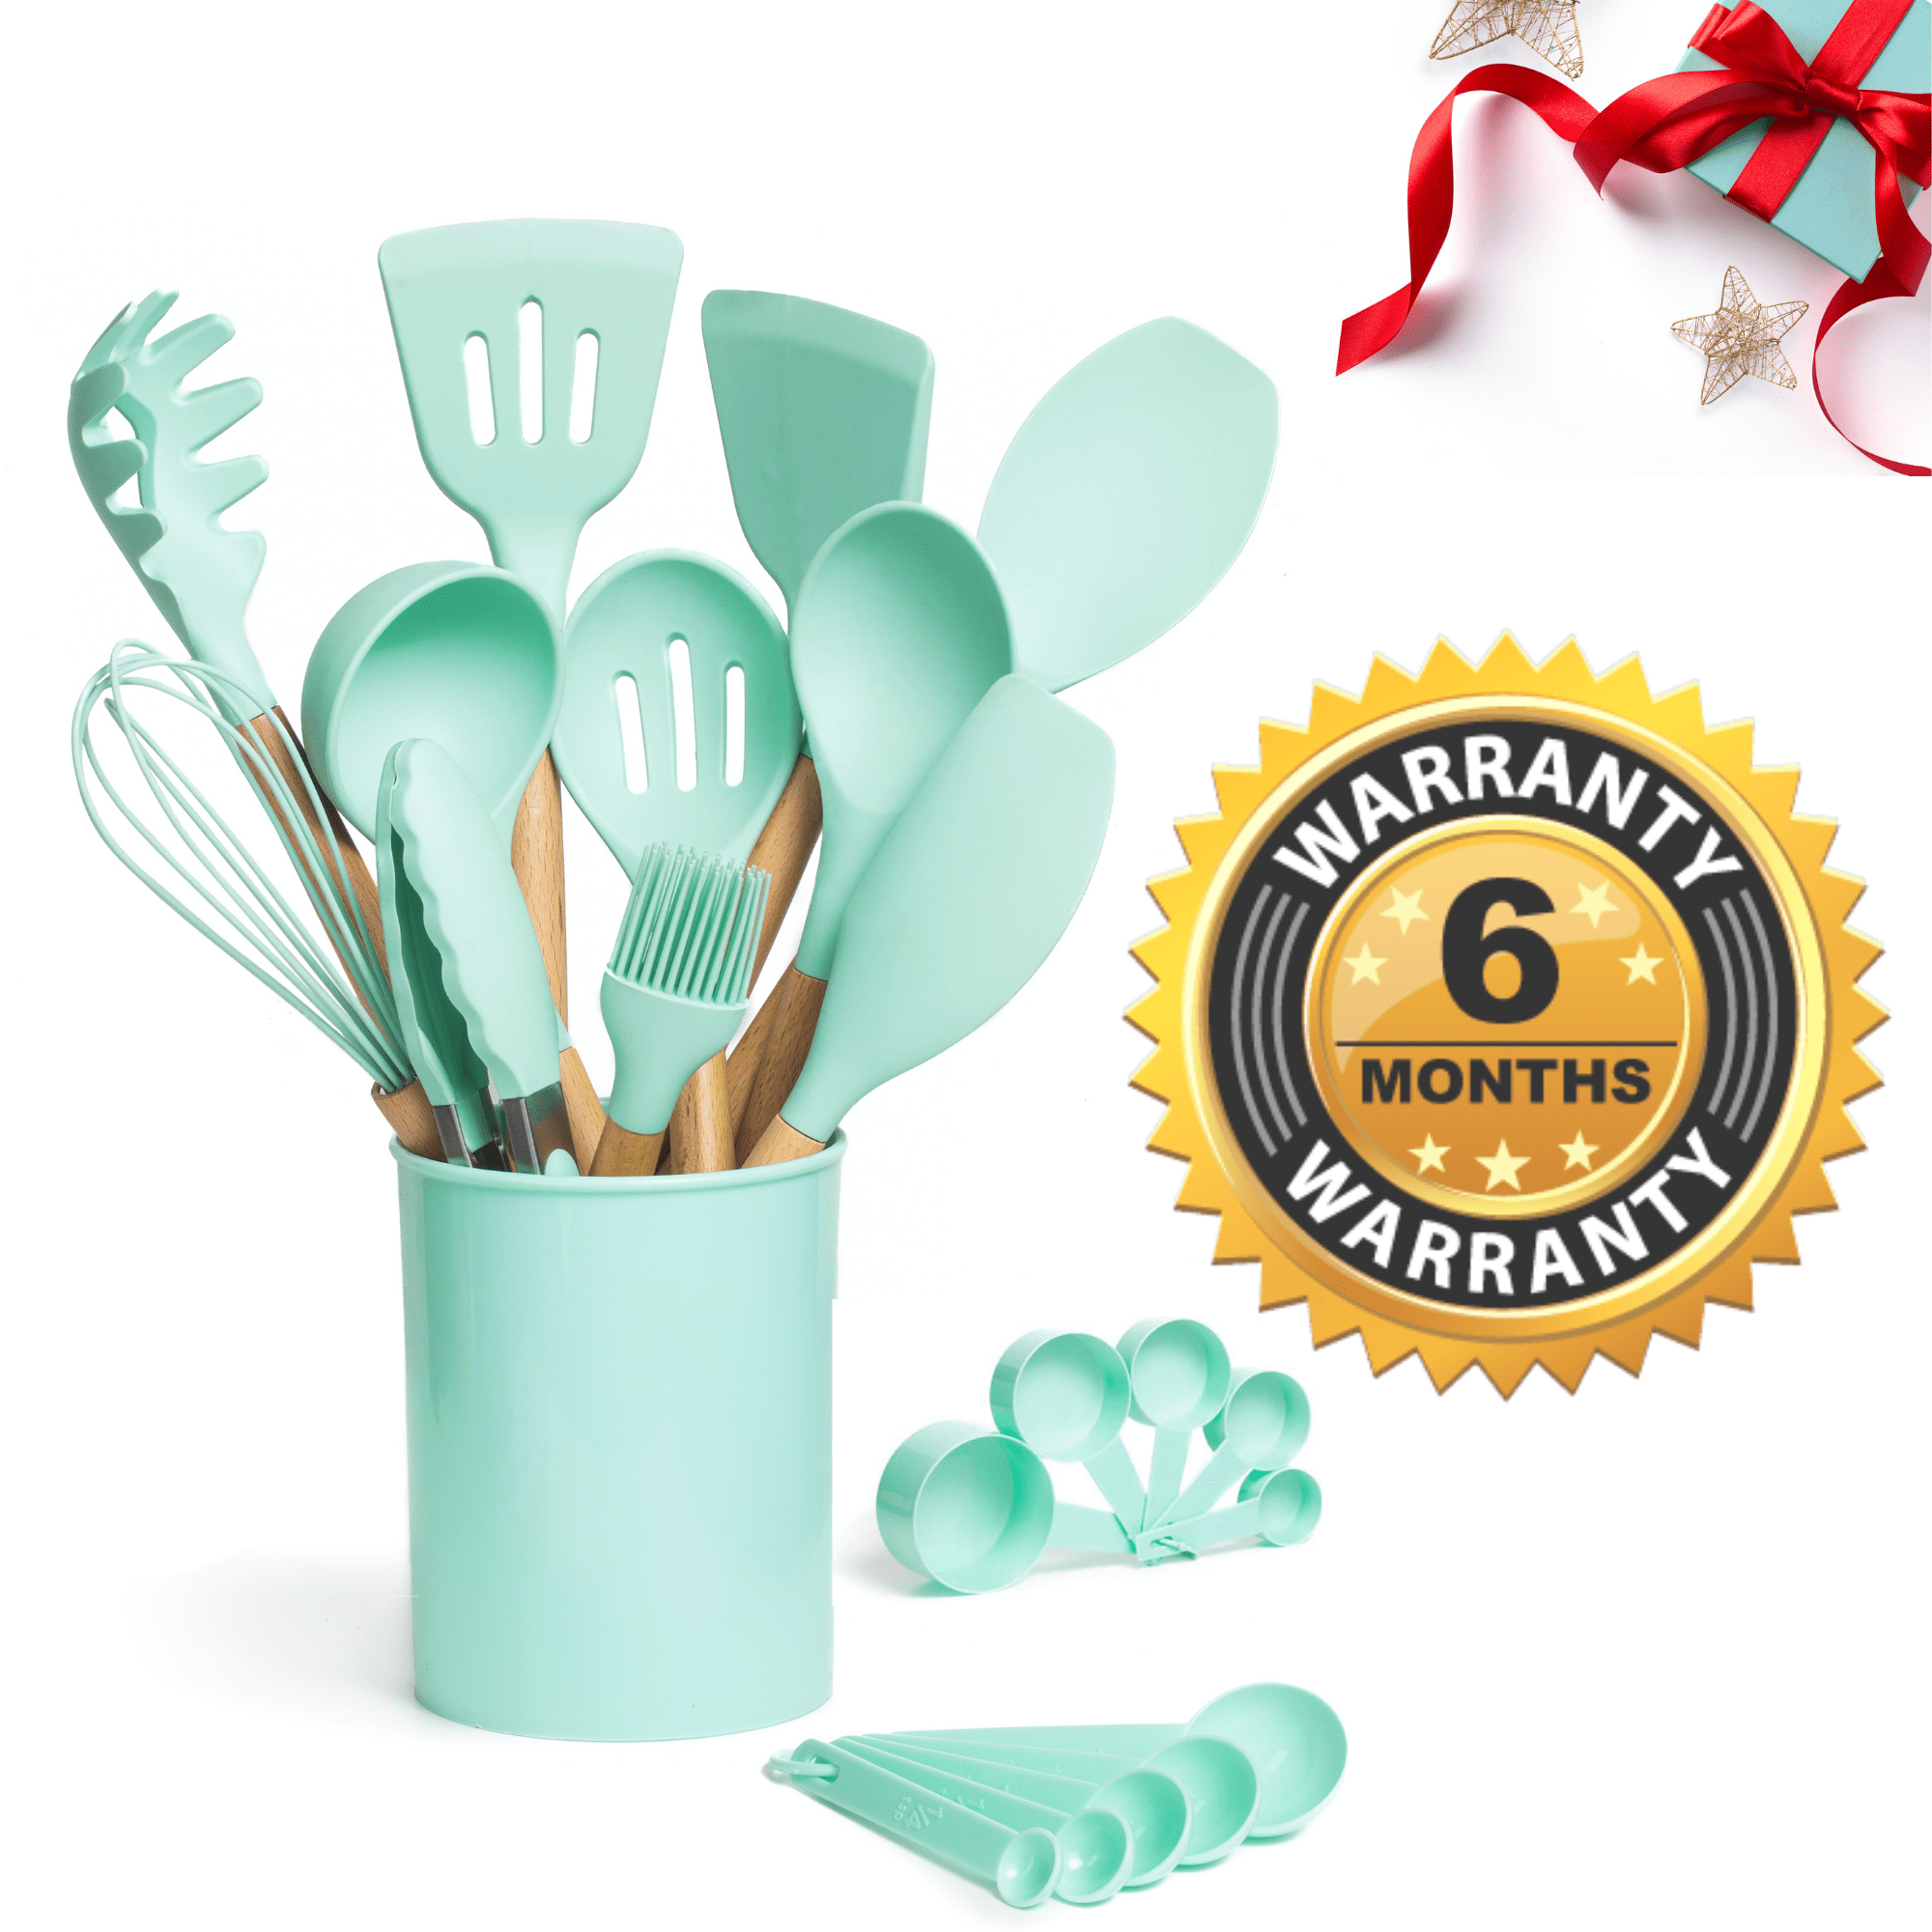 Silicone kitchen utensils - Complete set – My Sweet Cozy Place